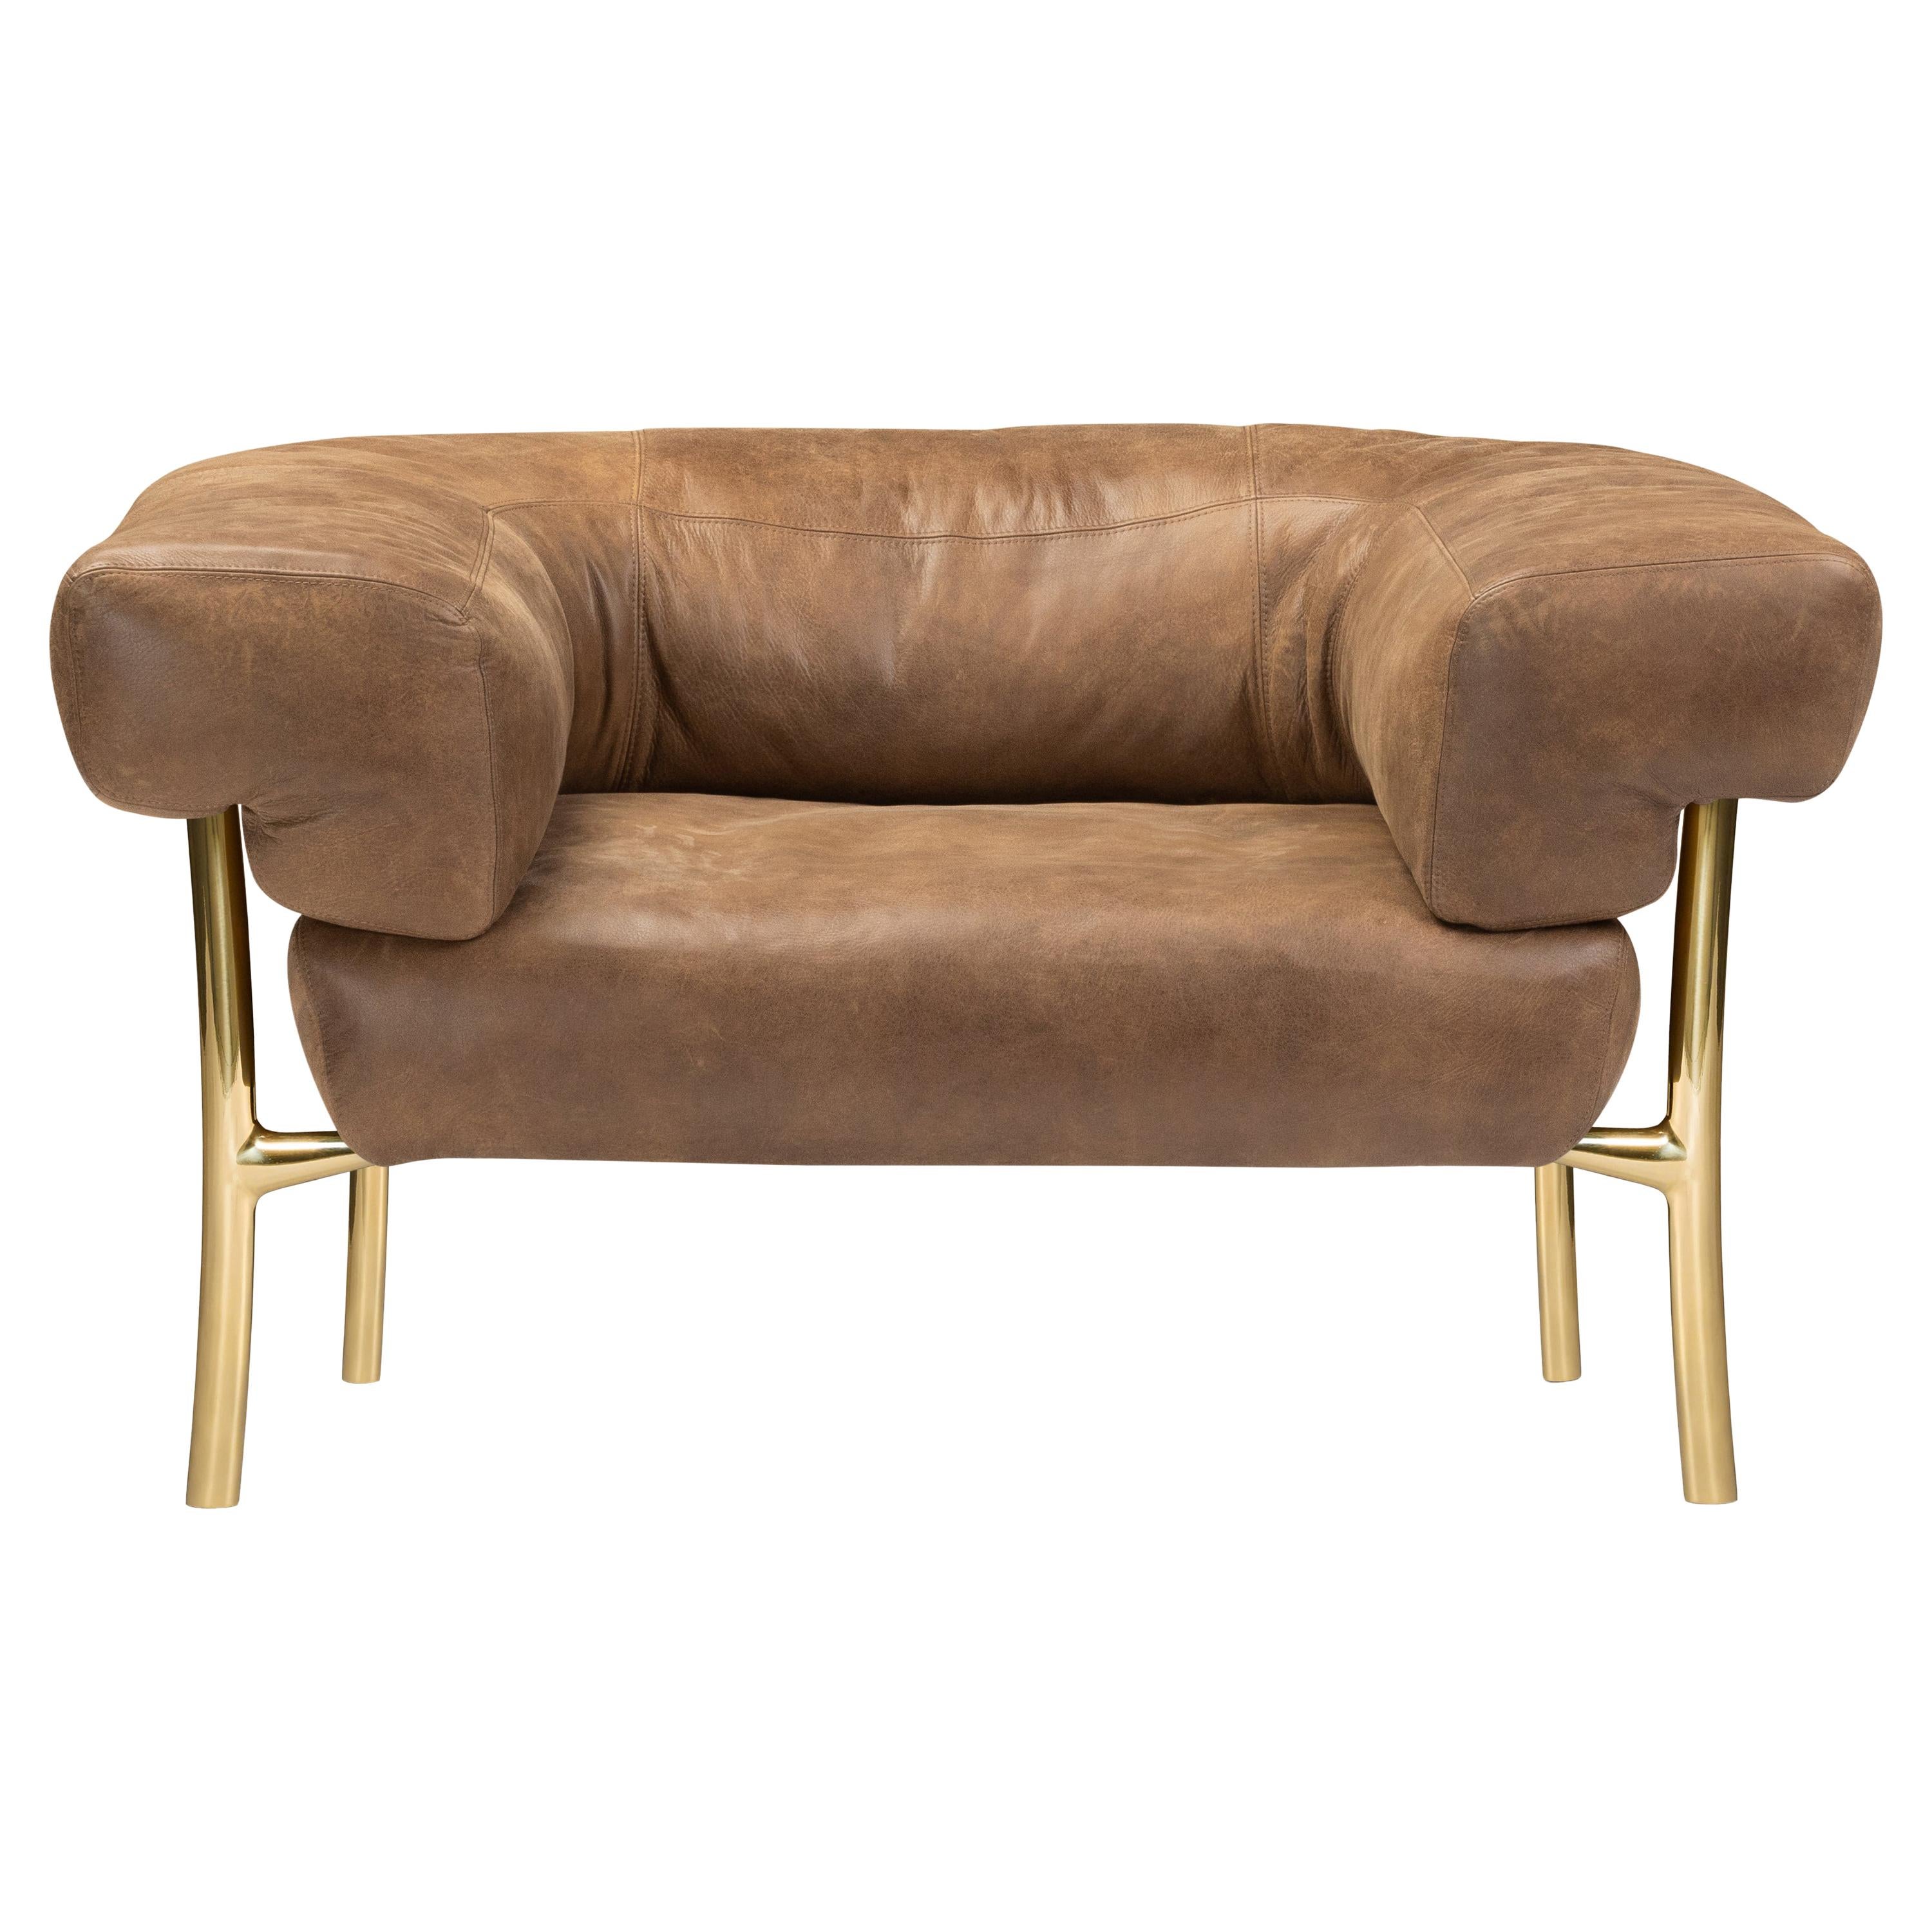 For Sale: Brown (610) Ghidini 1961 Katana Lounge Chair in Leather & Polished Brass by Paolo Rizzatto